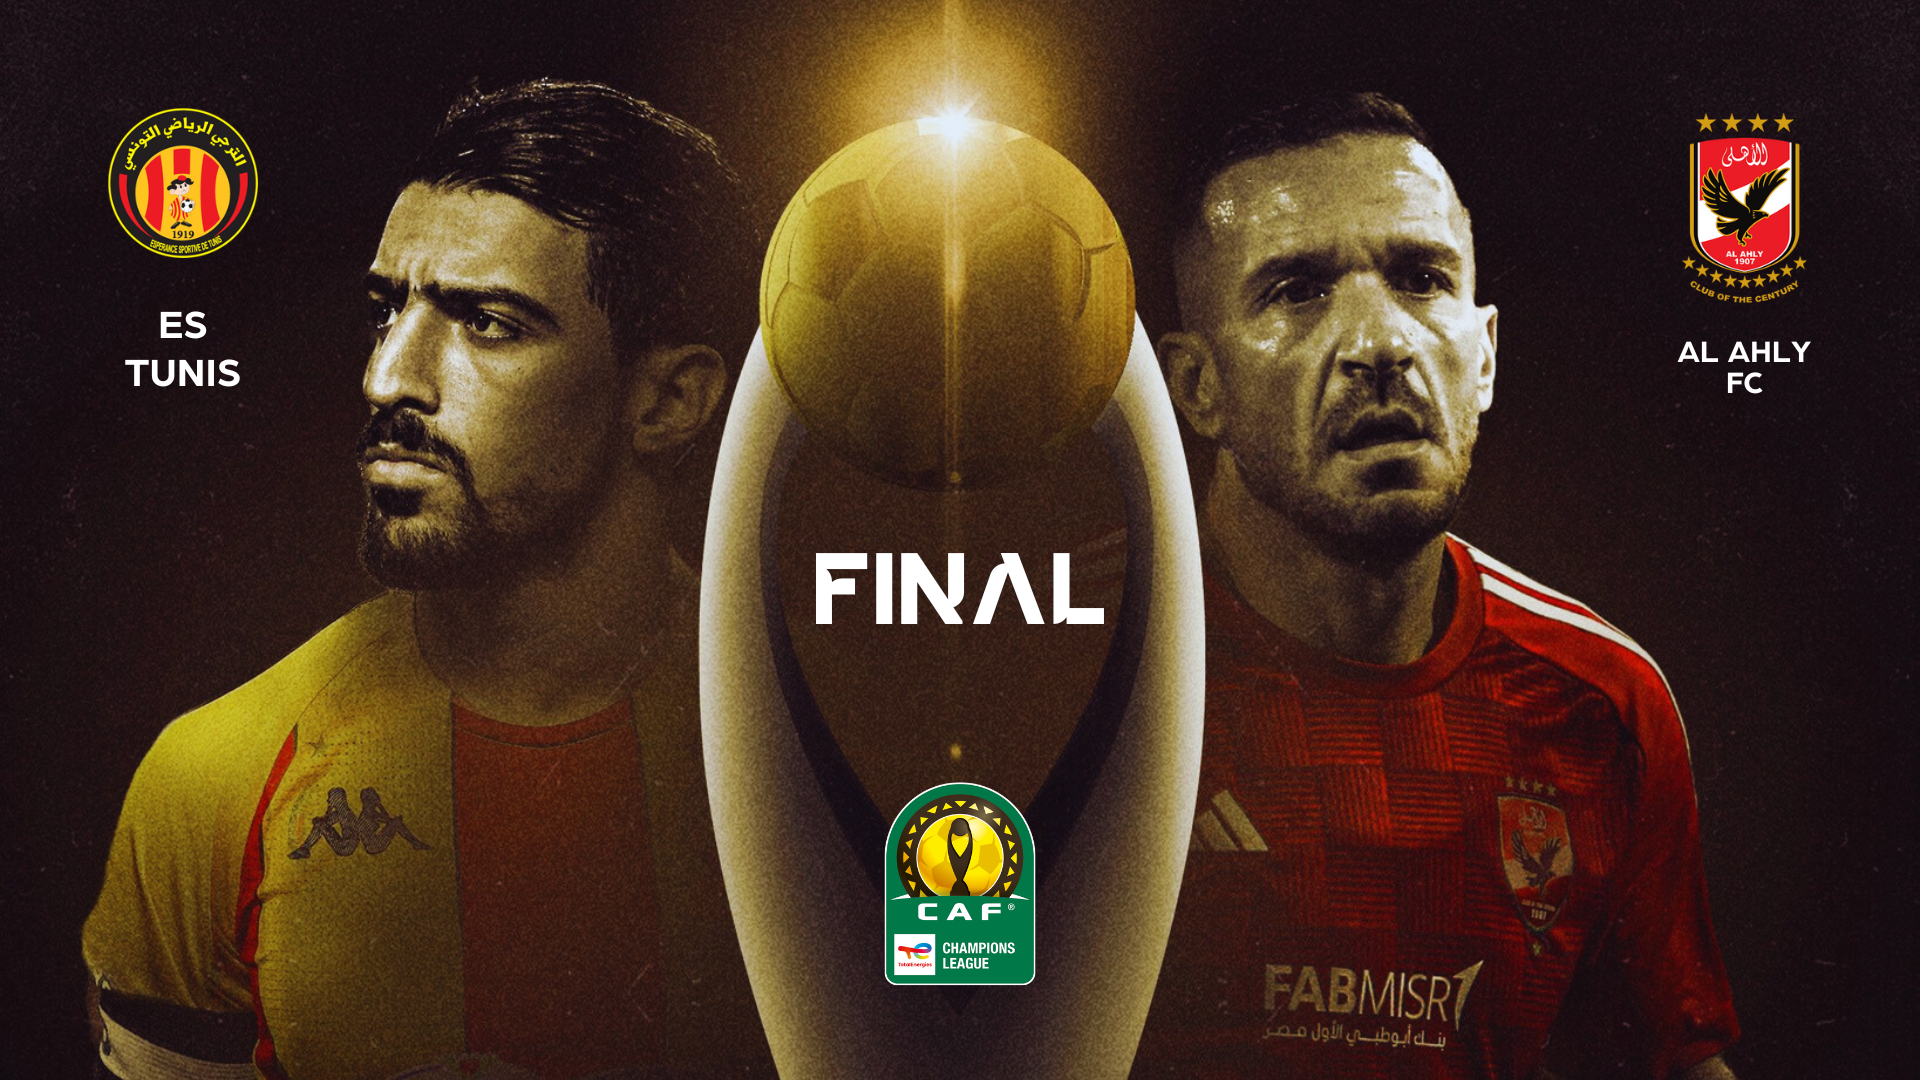 Nothing to separate Espérance and Ahly in first leg TotalEnergies CAF Champions League Final 